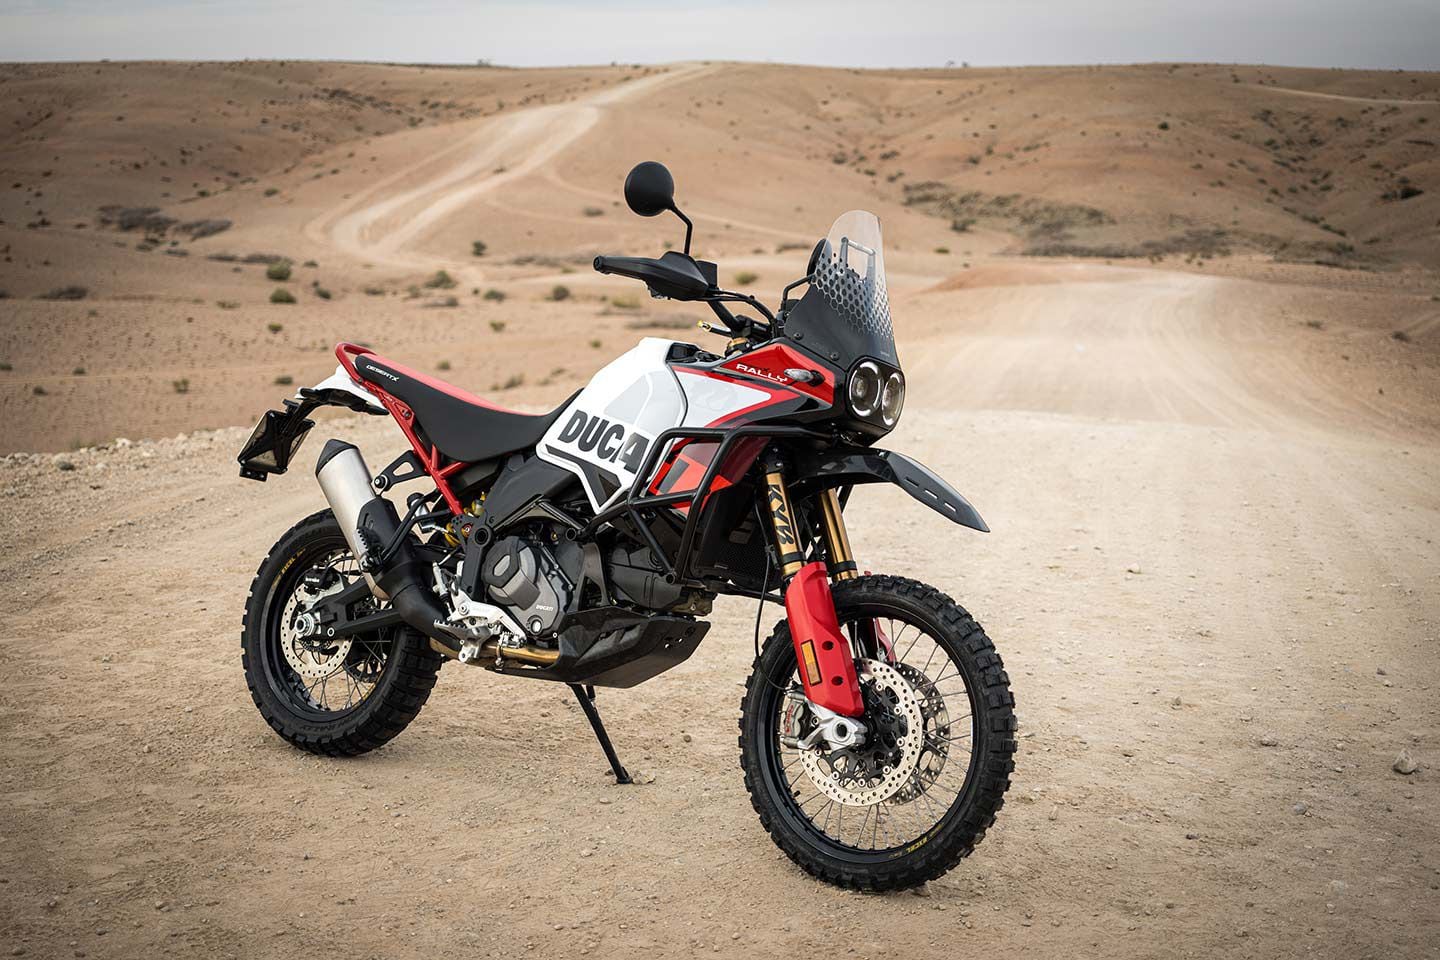 Two days in Morocco proved the mettle of Ducati's DesertX Rally.